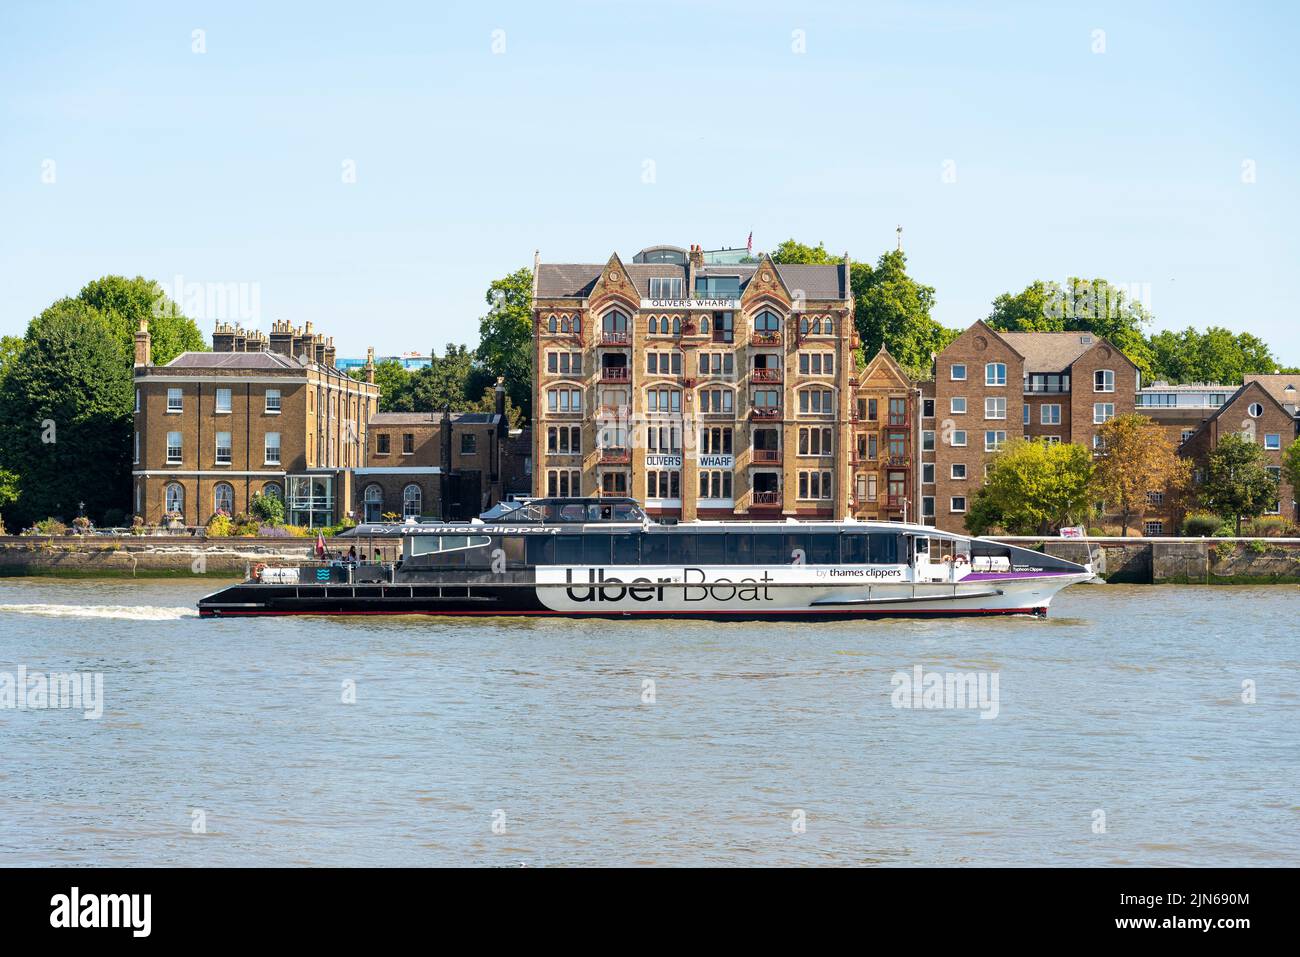 Oliver's Wharf building in the Pool of London on the River Thames. Former warehouse, developed into luxury riverfront apartments. Uber Boat passing Stock Photo